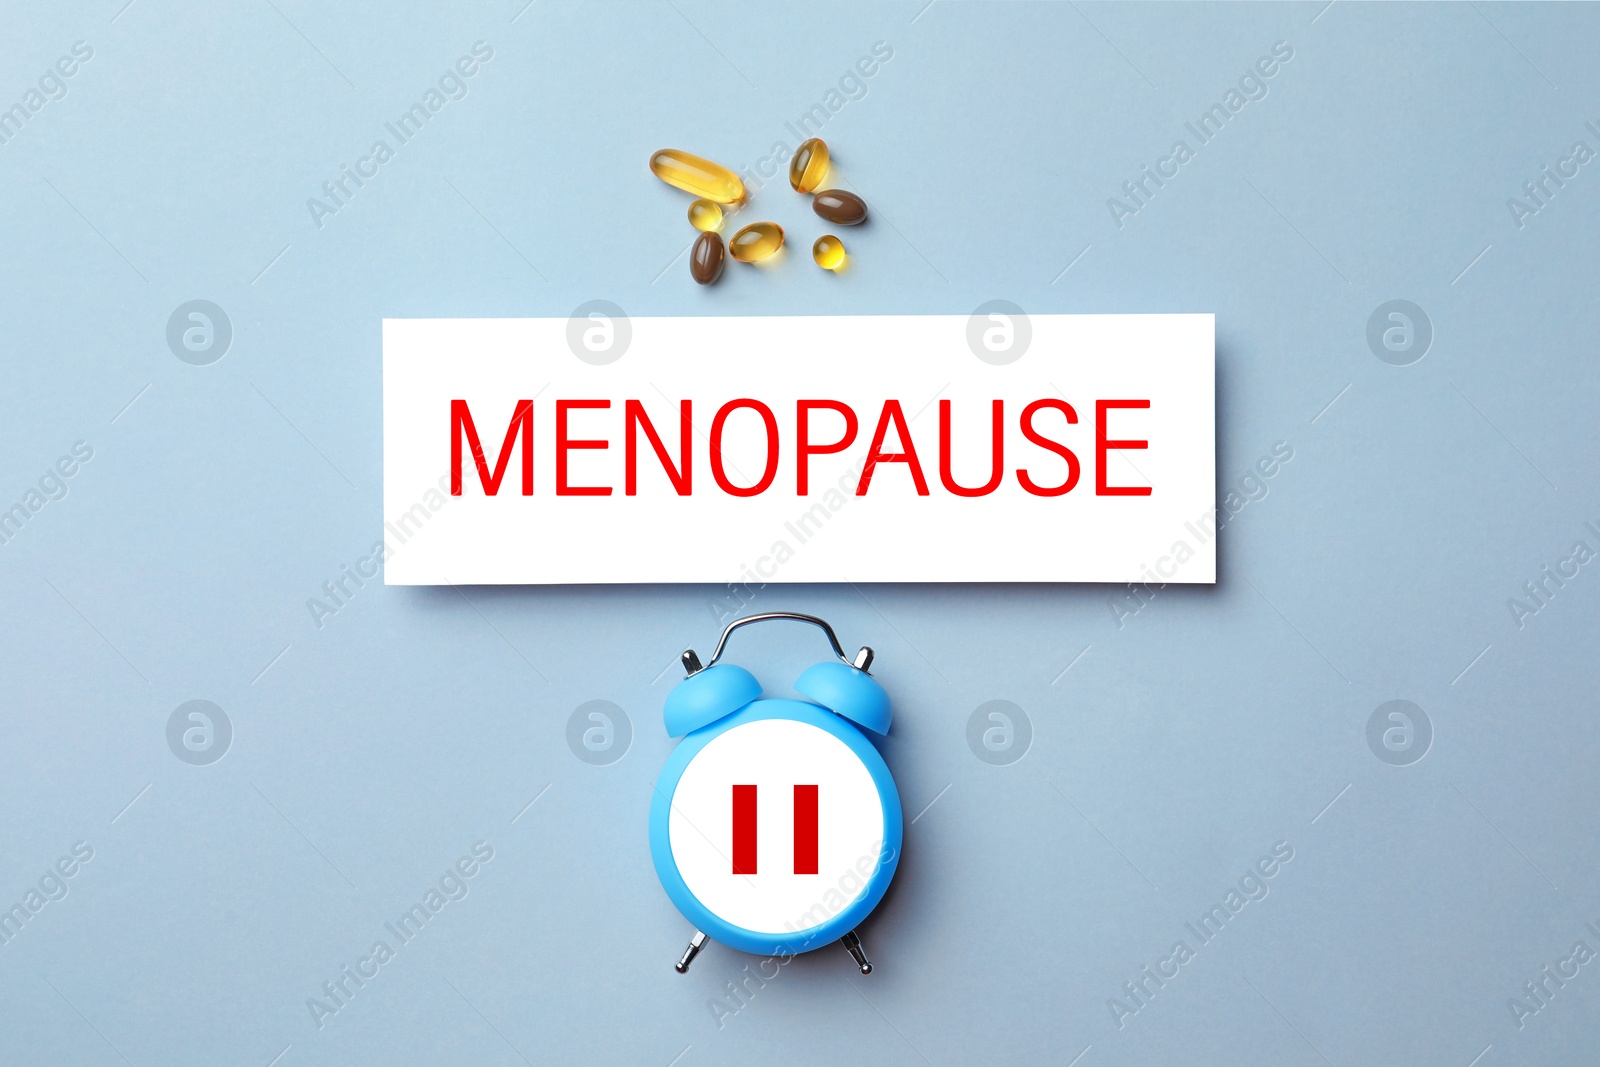 Image of Menopause word, alarm clock with pause symbol and pills on light blue background, top view